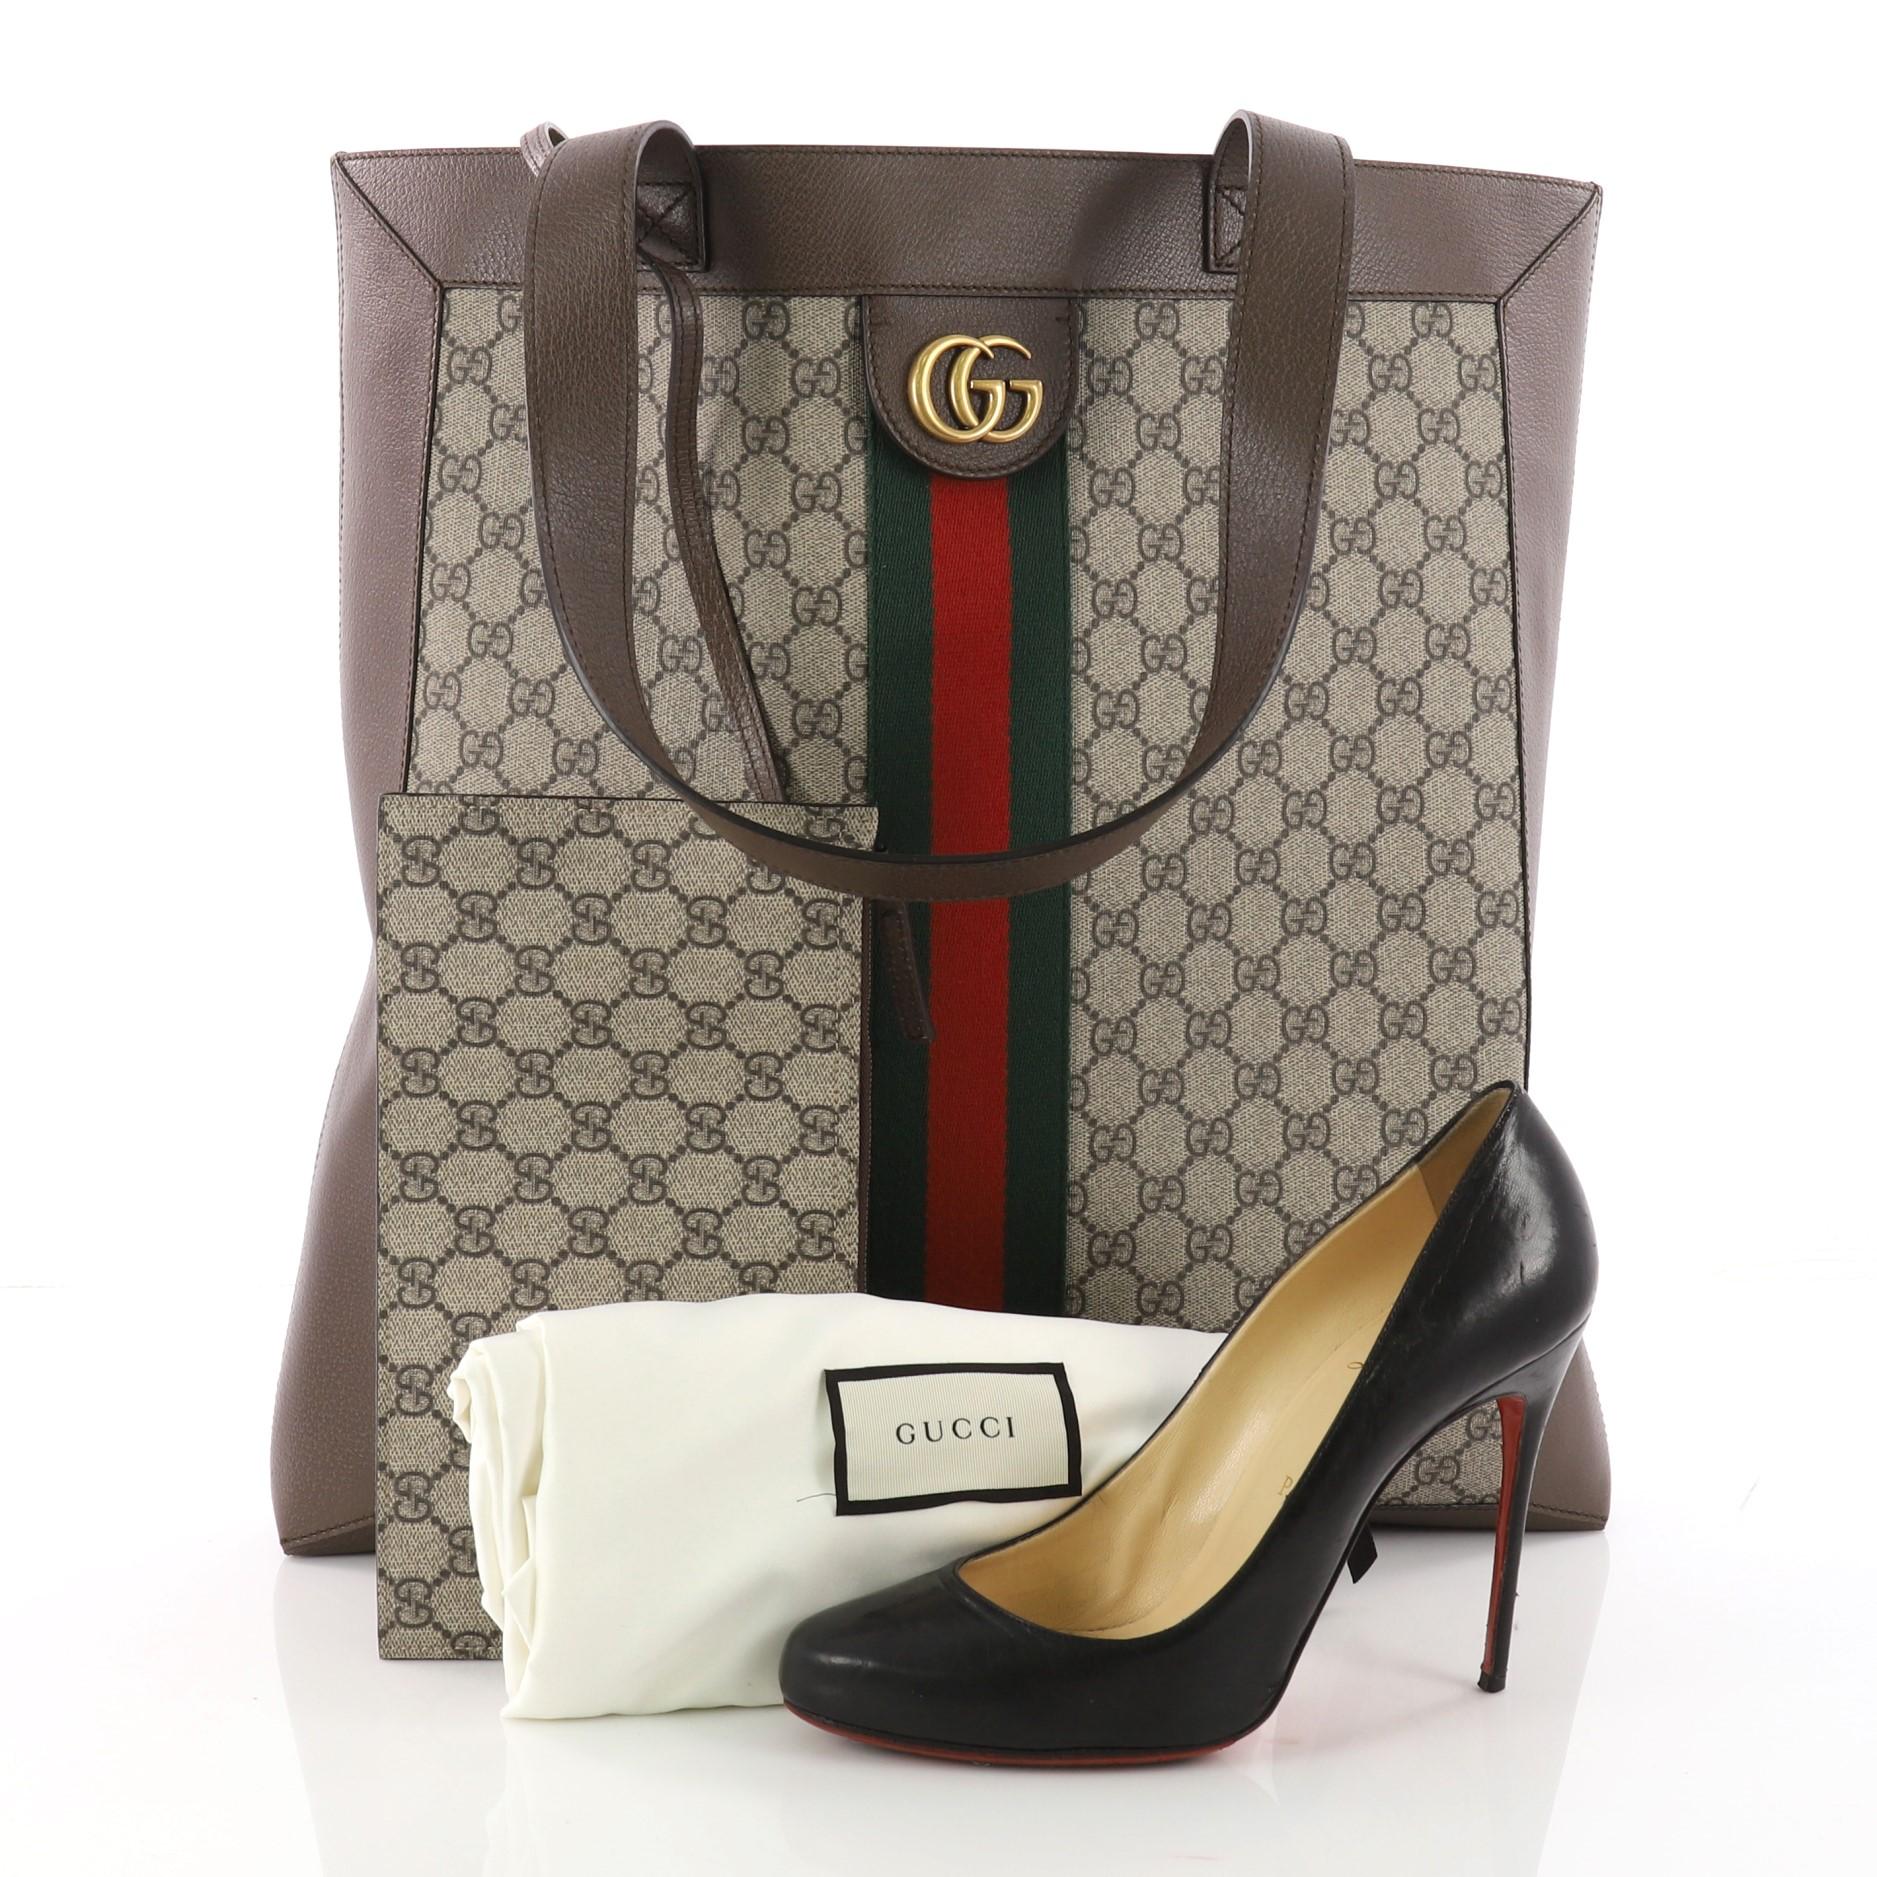 This authentic Gucci Ophidia Soft Open Tote GG Coated Canvas Large is a perfect new bag to carry everyday. Crafted in taupe GG supreme coated canvas, this chic bag features dual flat leather handles, signature green and red web detailing, GG logo